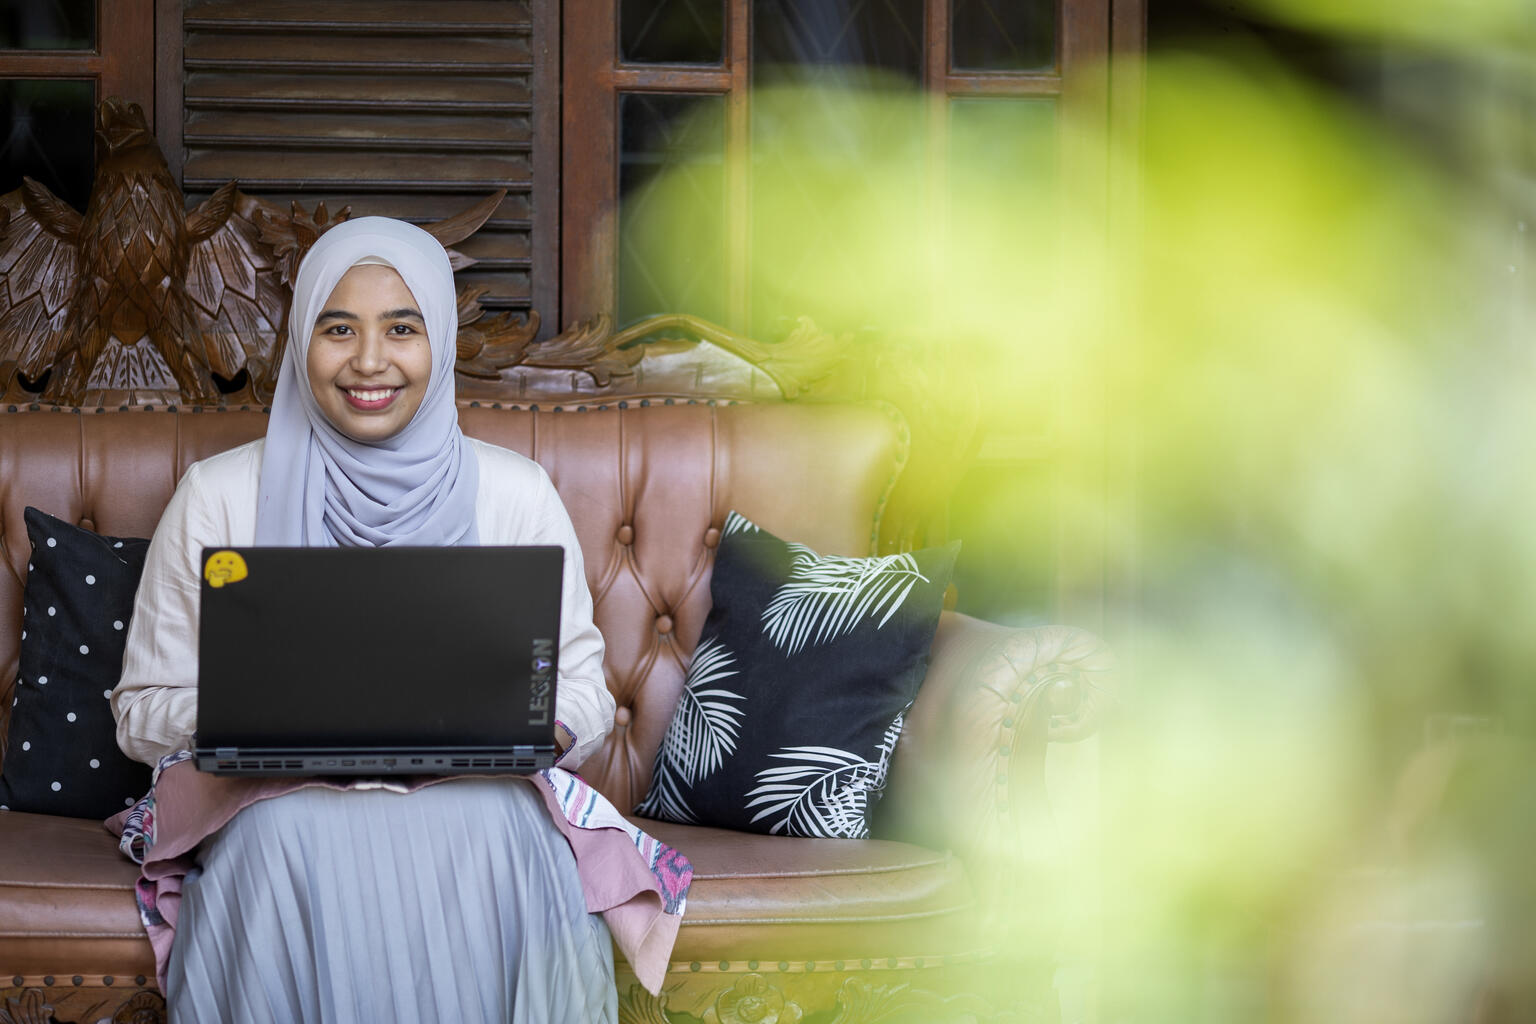 A 22-year-old poses for a photograph on her laptop in Indonesia.